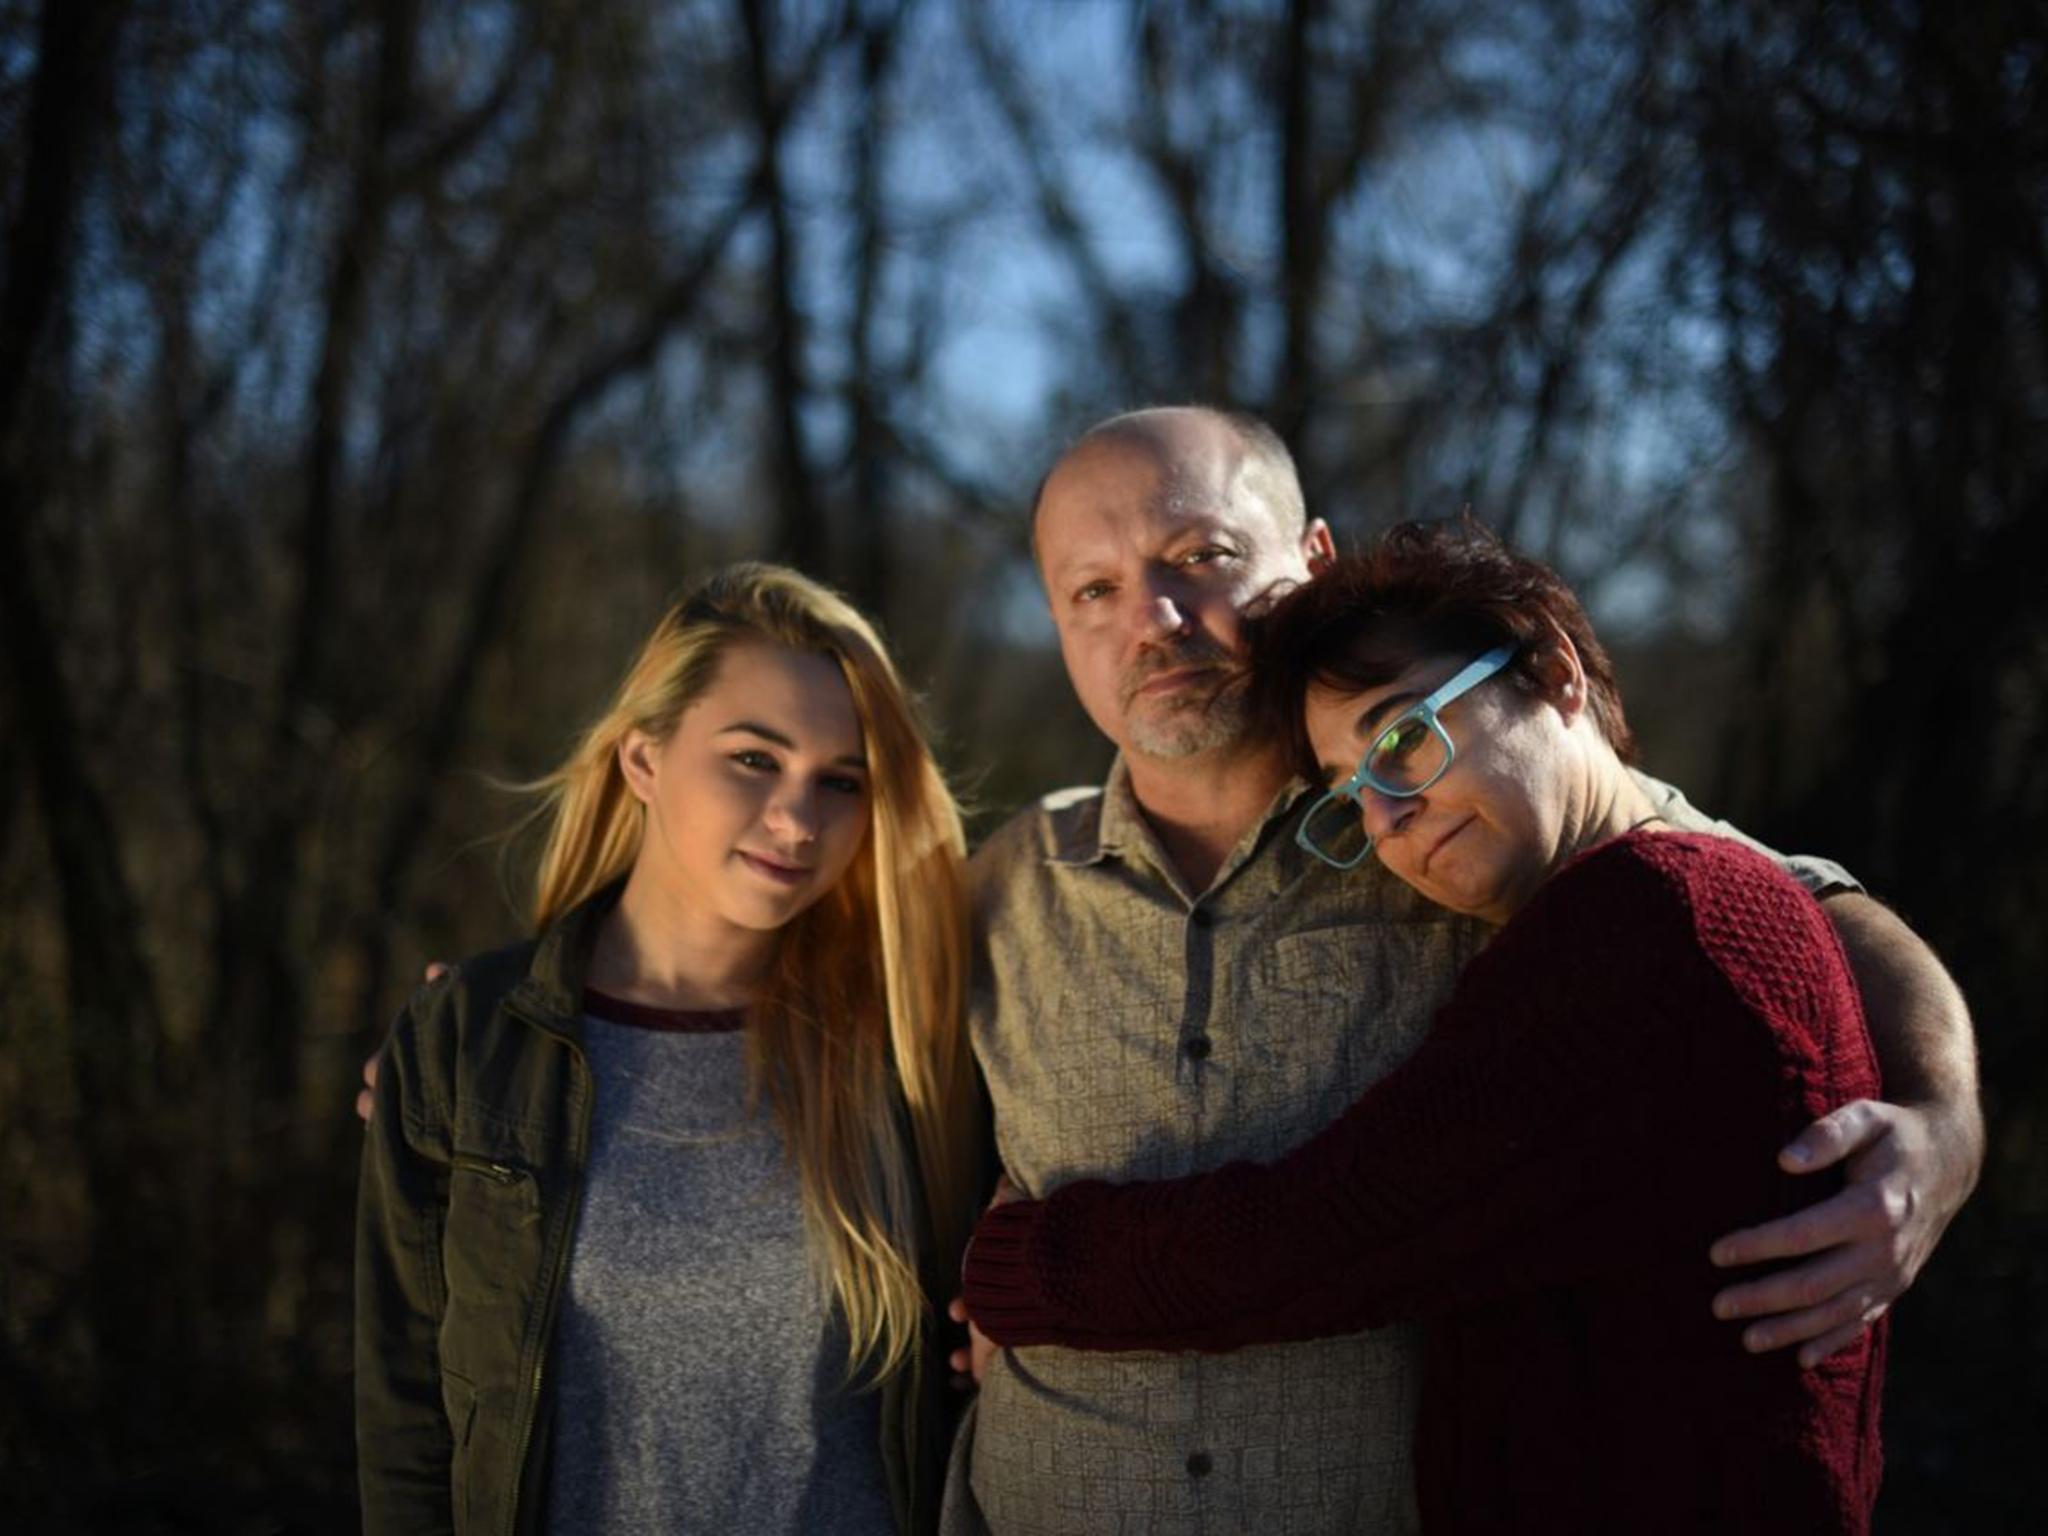 Charlotte Zaremba’s family — sister Audrey, father Jim and mother Suzanne — stand outside their Ellicott City, Md., home, where the 16-year-old was shot to death by a high school classmate on New Year’s Day